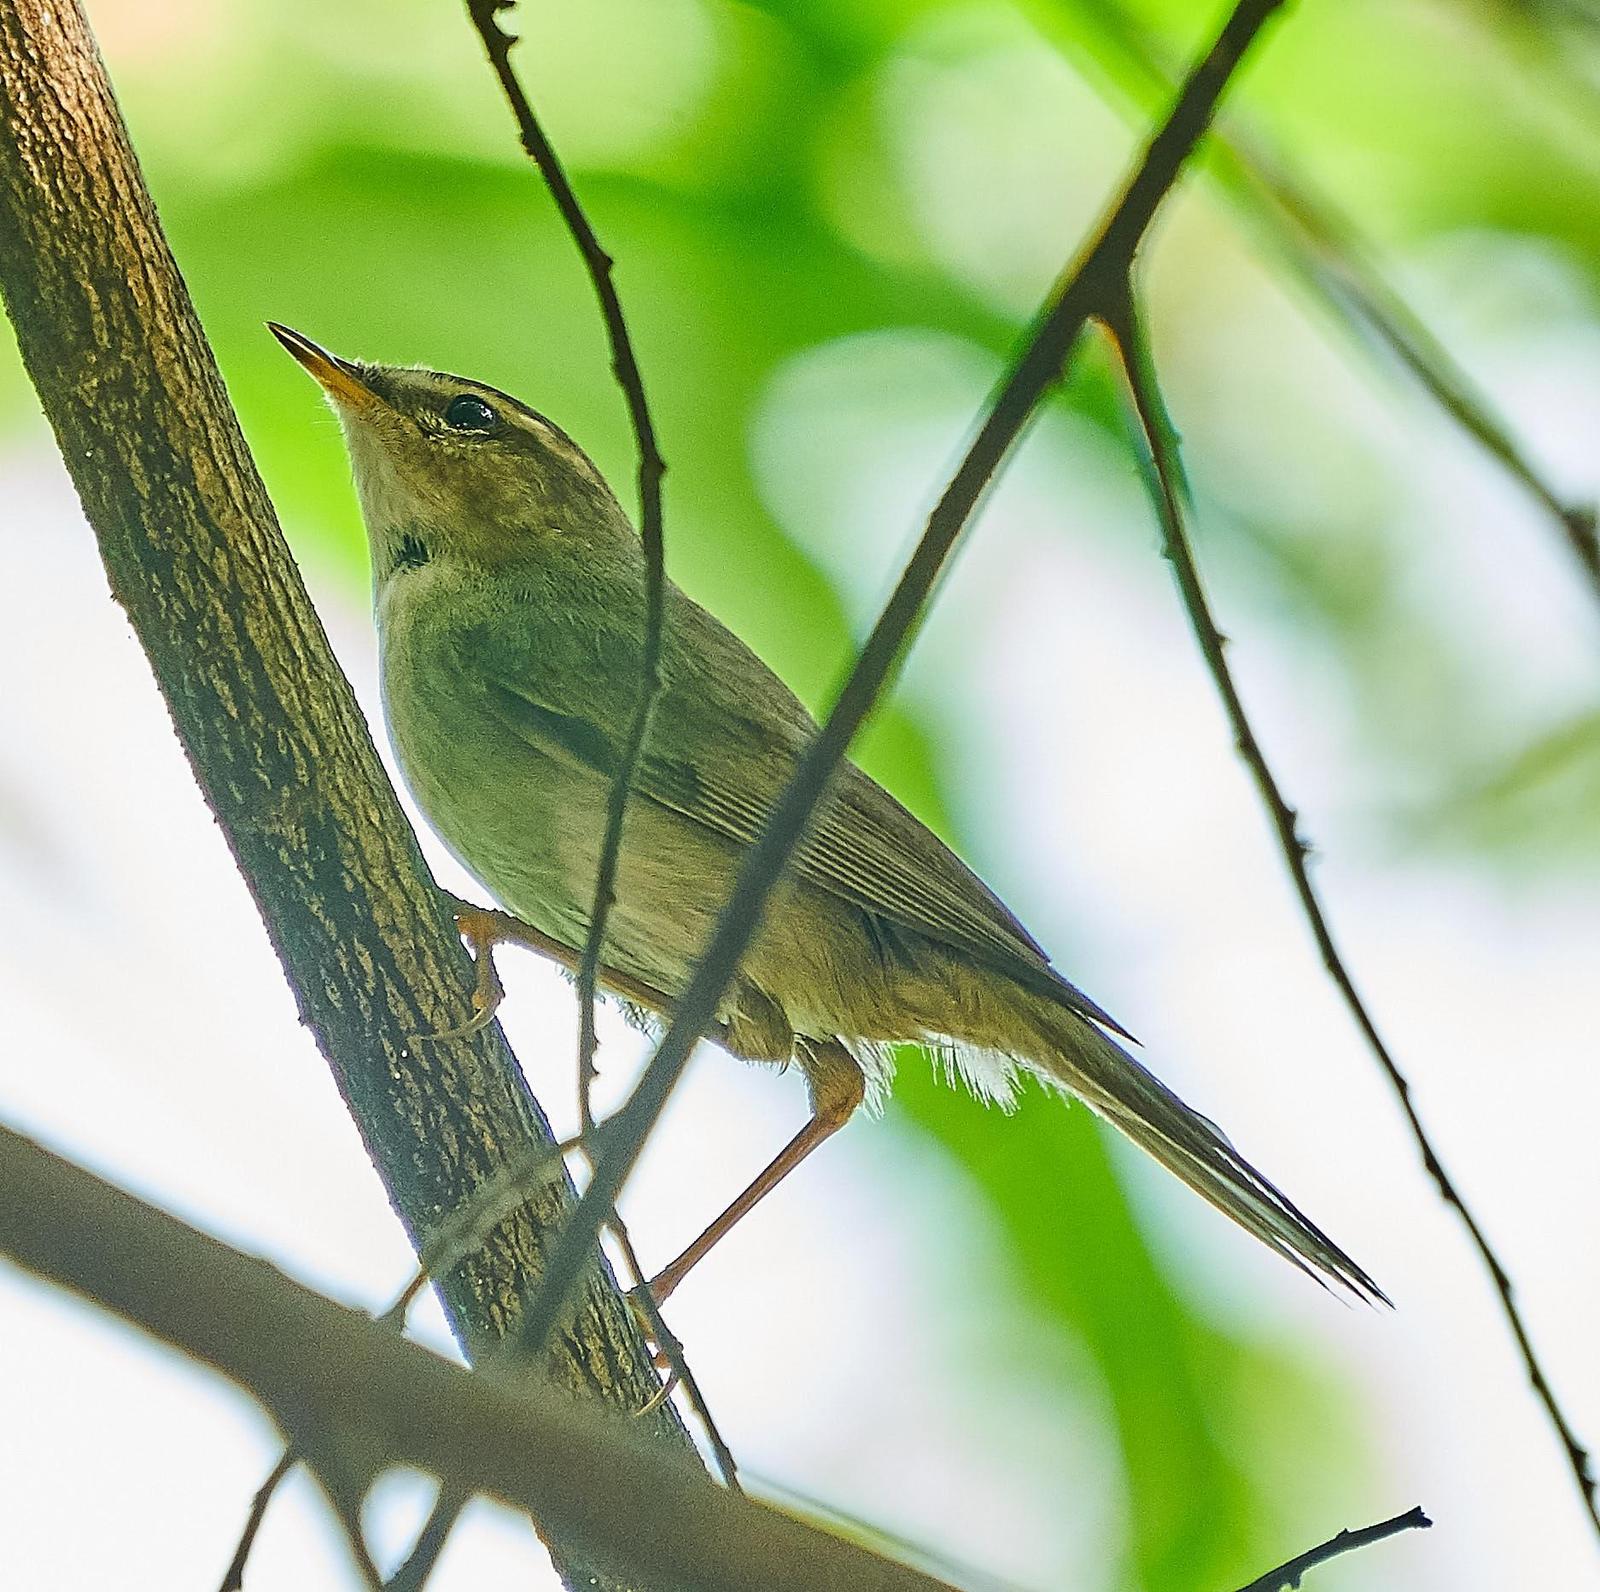 Dusky Warbler Photo by Steven Cheong